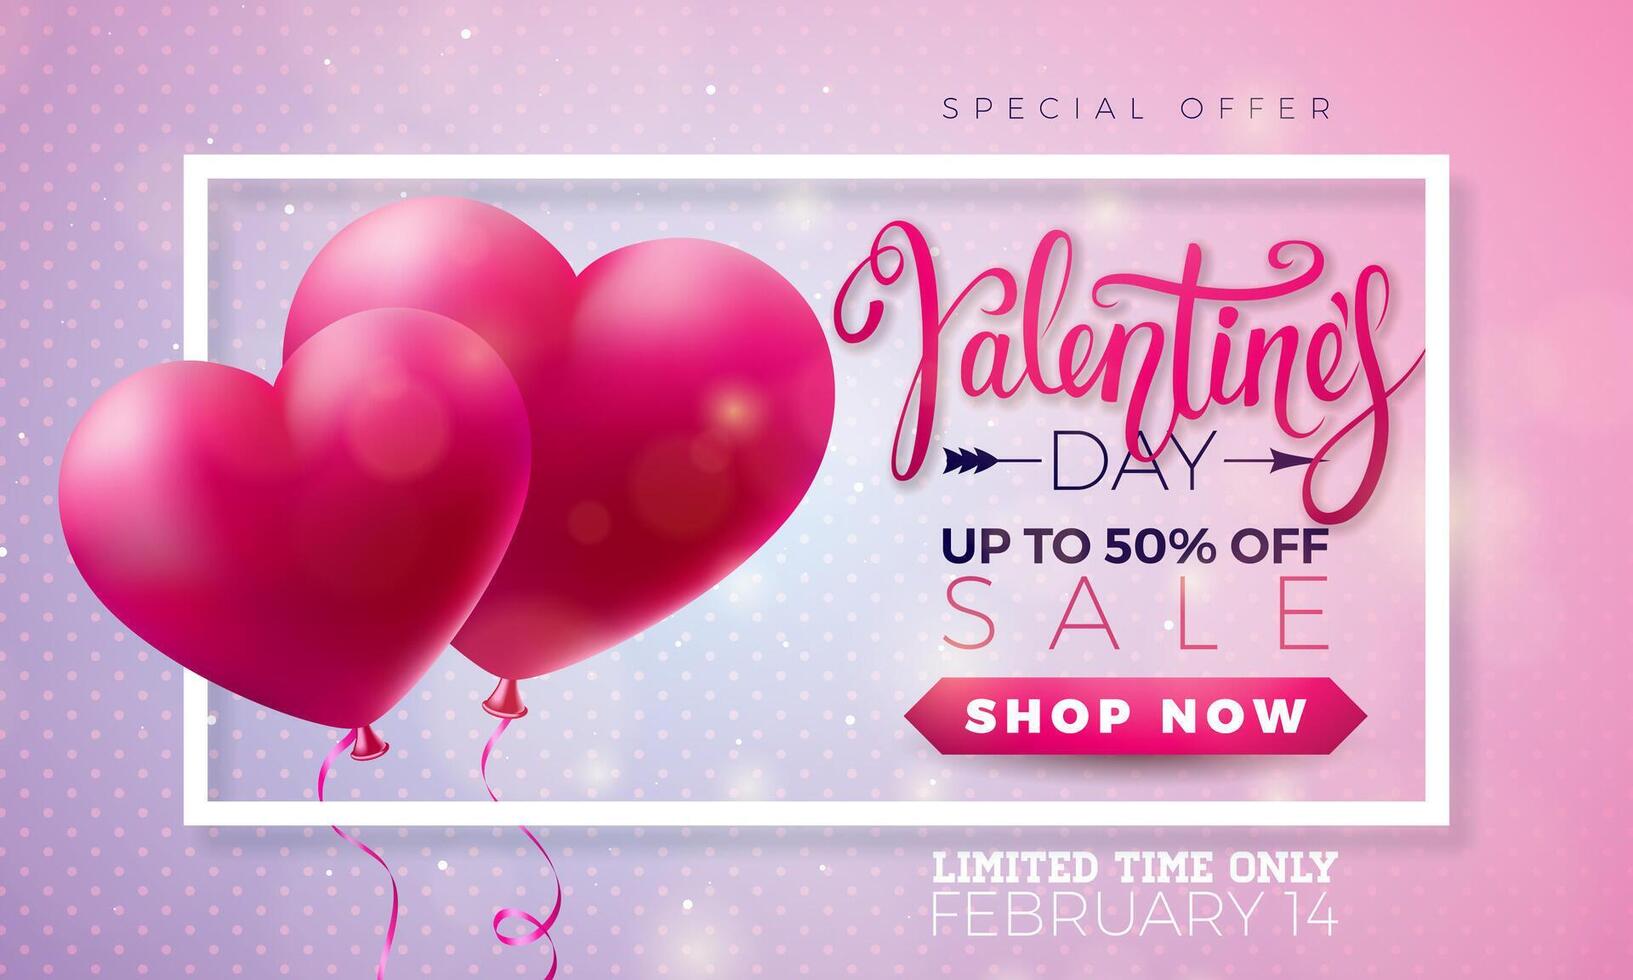 Valentines Day Sale Design with Red Heart Balloon on Shiny Light Pink Background. Vector Special Offer Illustration for Coupon, Banner, Voucher or Promotional Poster